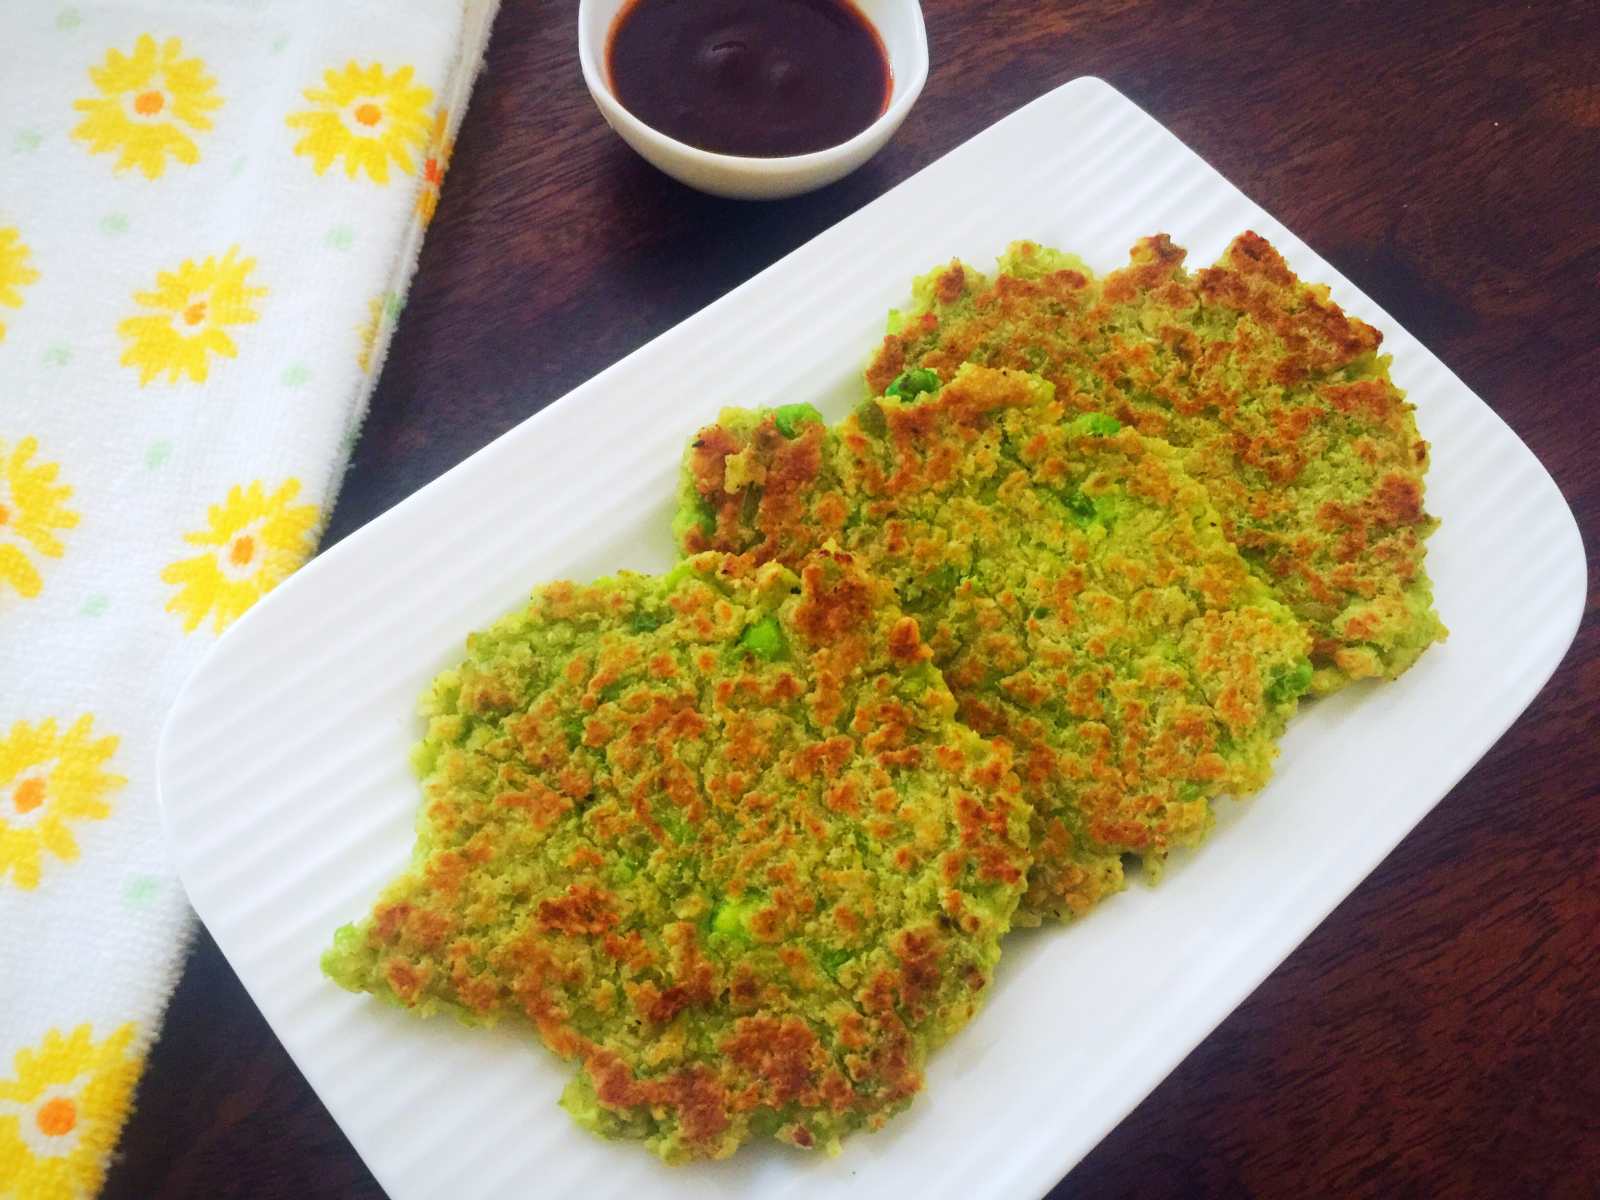 Cottage Cheese And Peas Oatmeal Pancakes Recipe